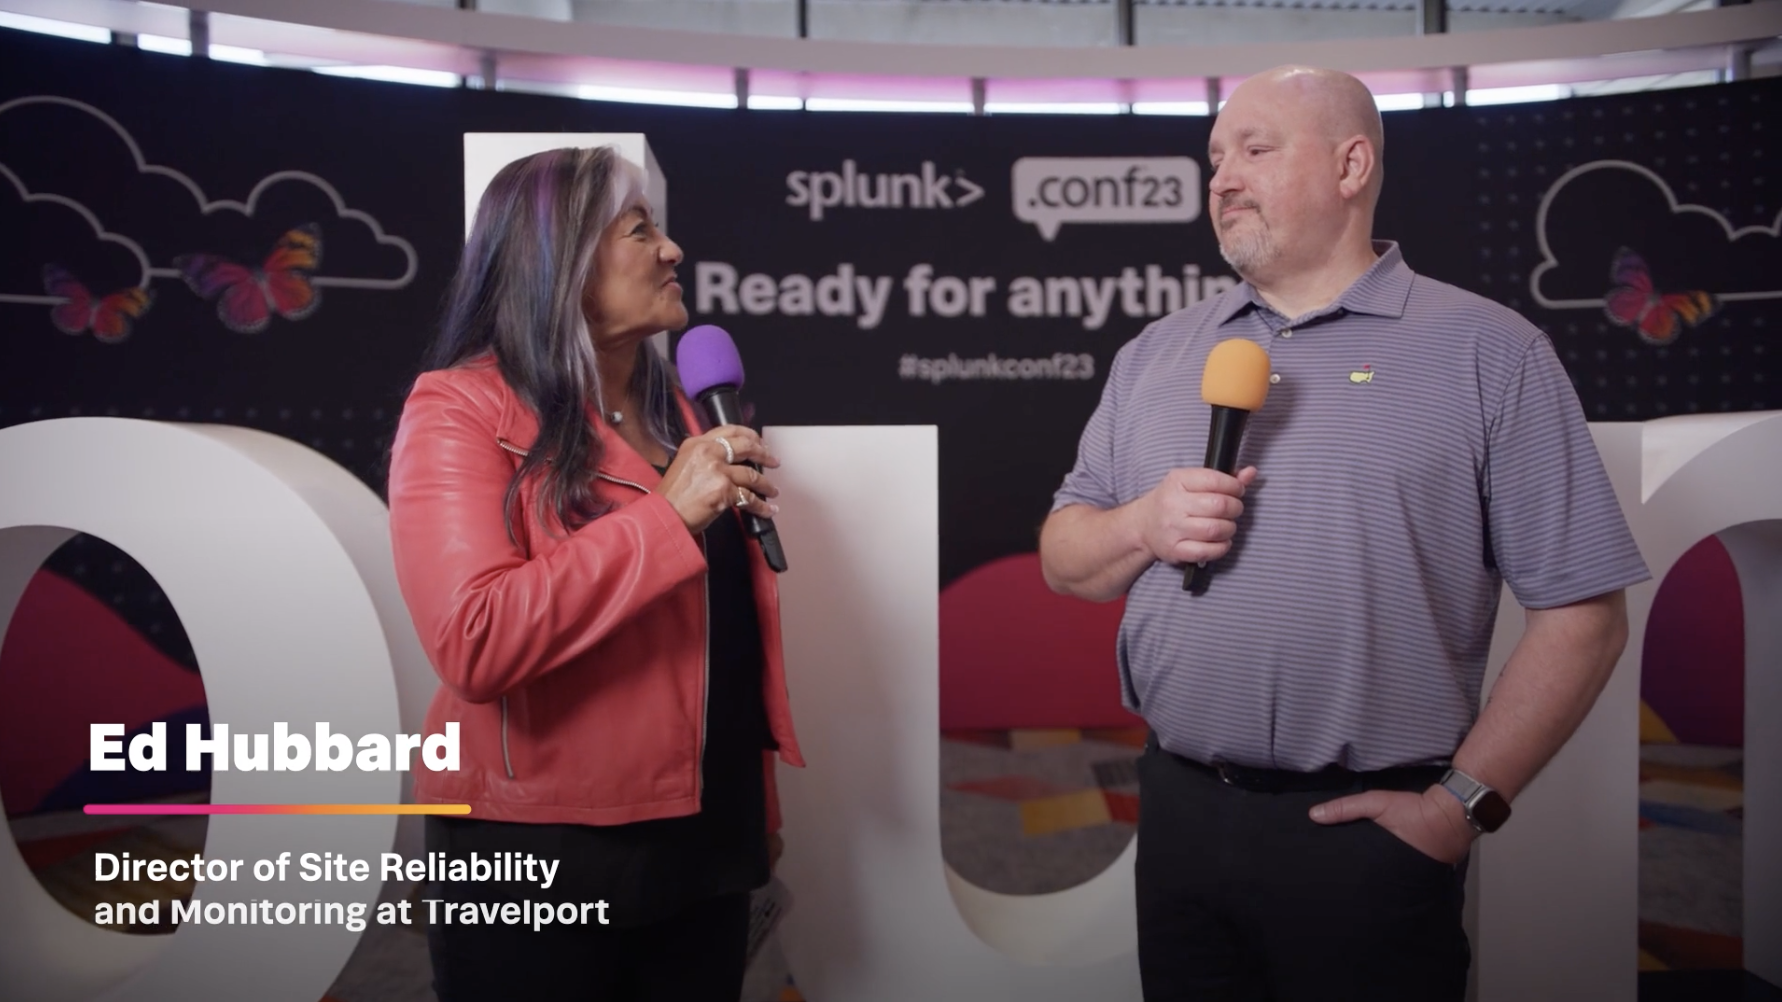 Travelport delivers a superior customer experience with help from Splunk